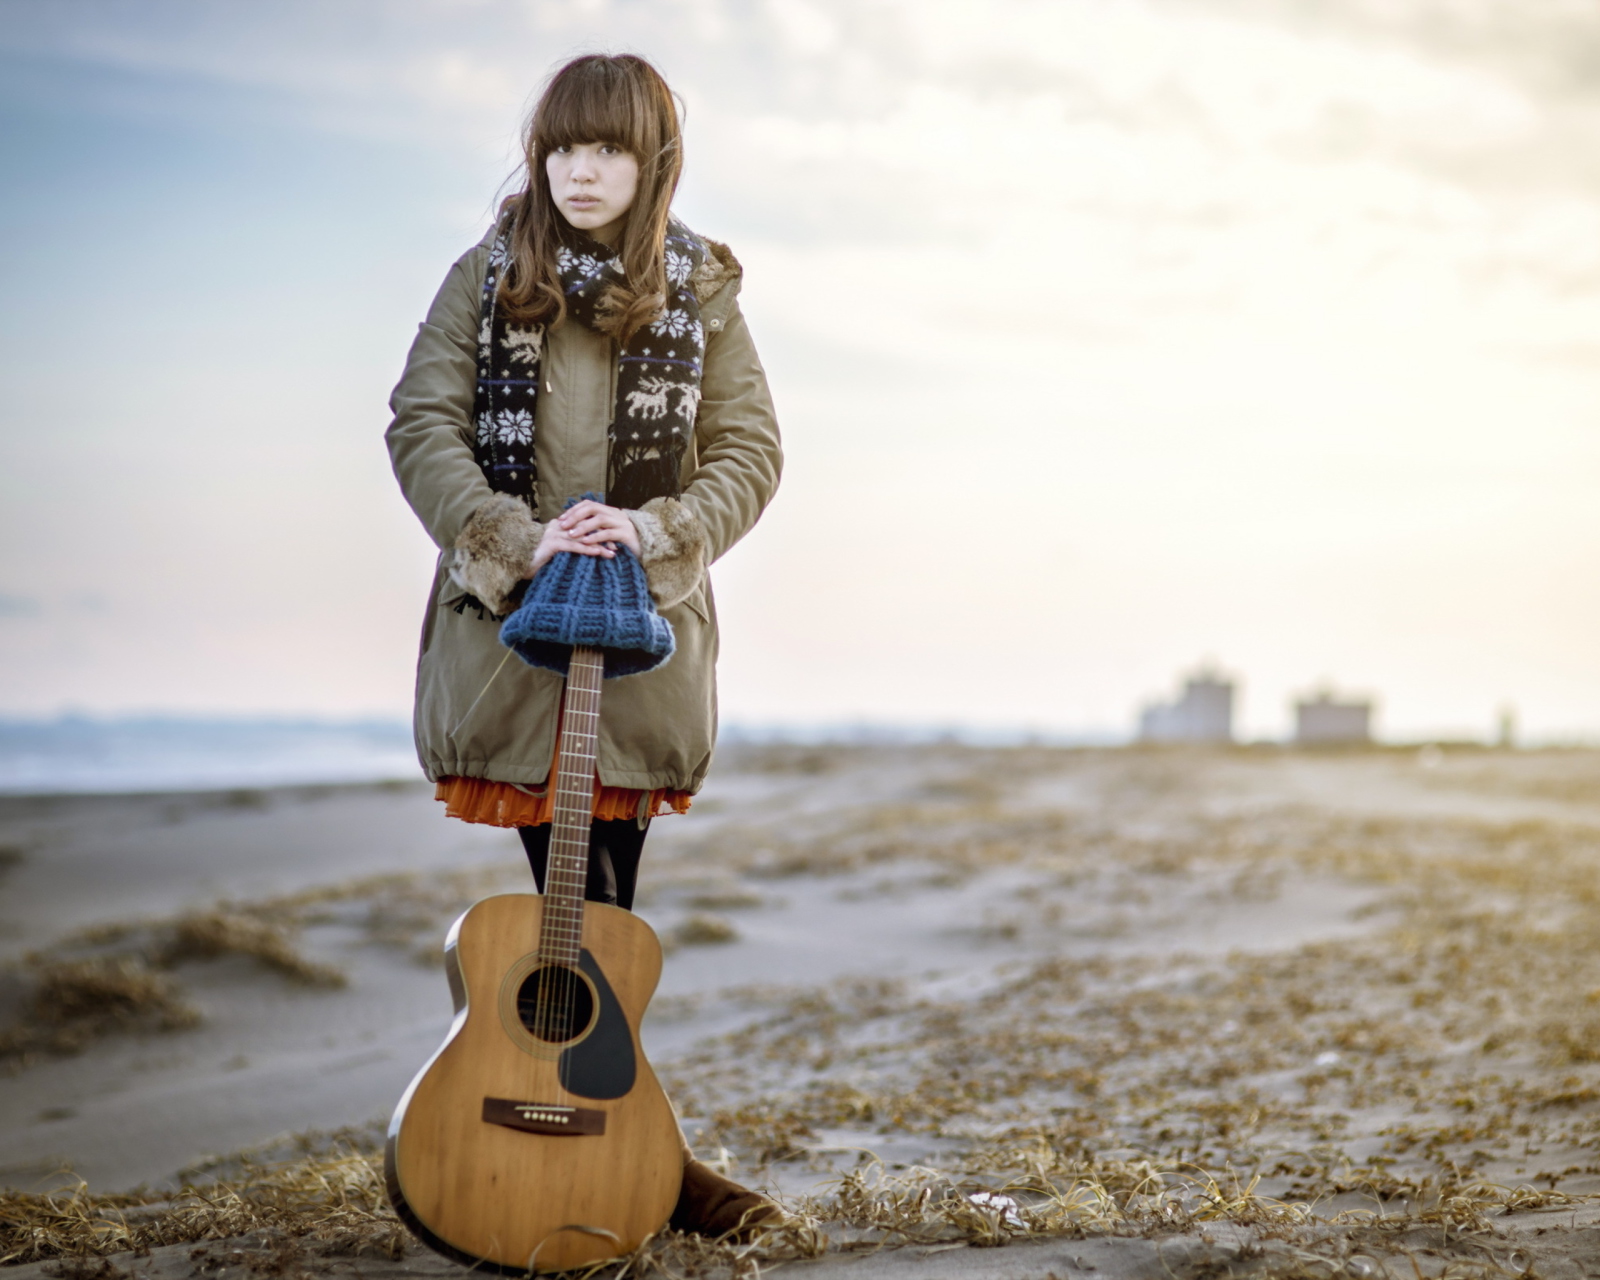 Asian Girl With Guitar Outside wallpaper 1600x1280